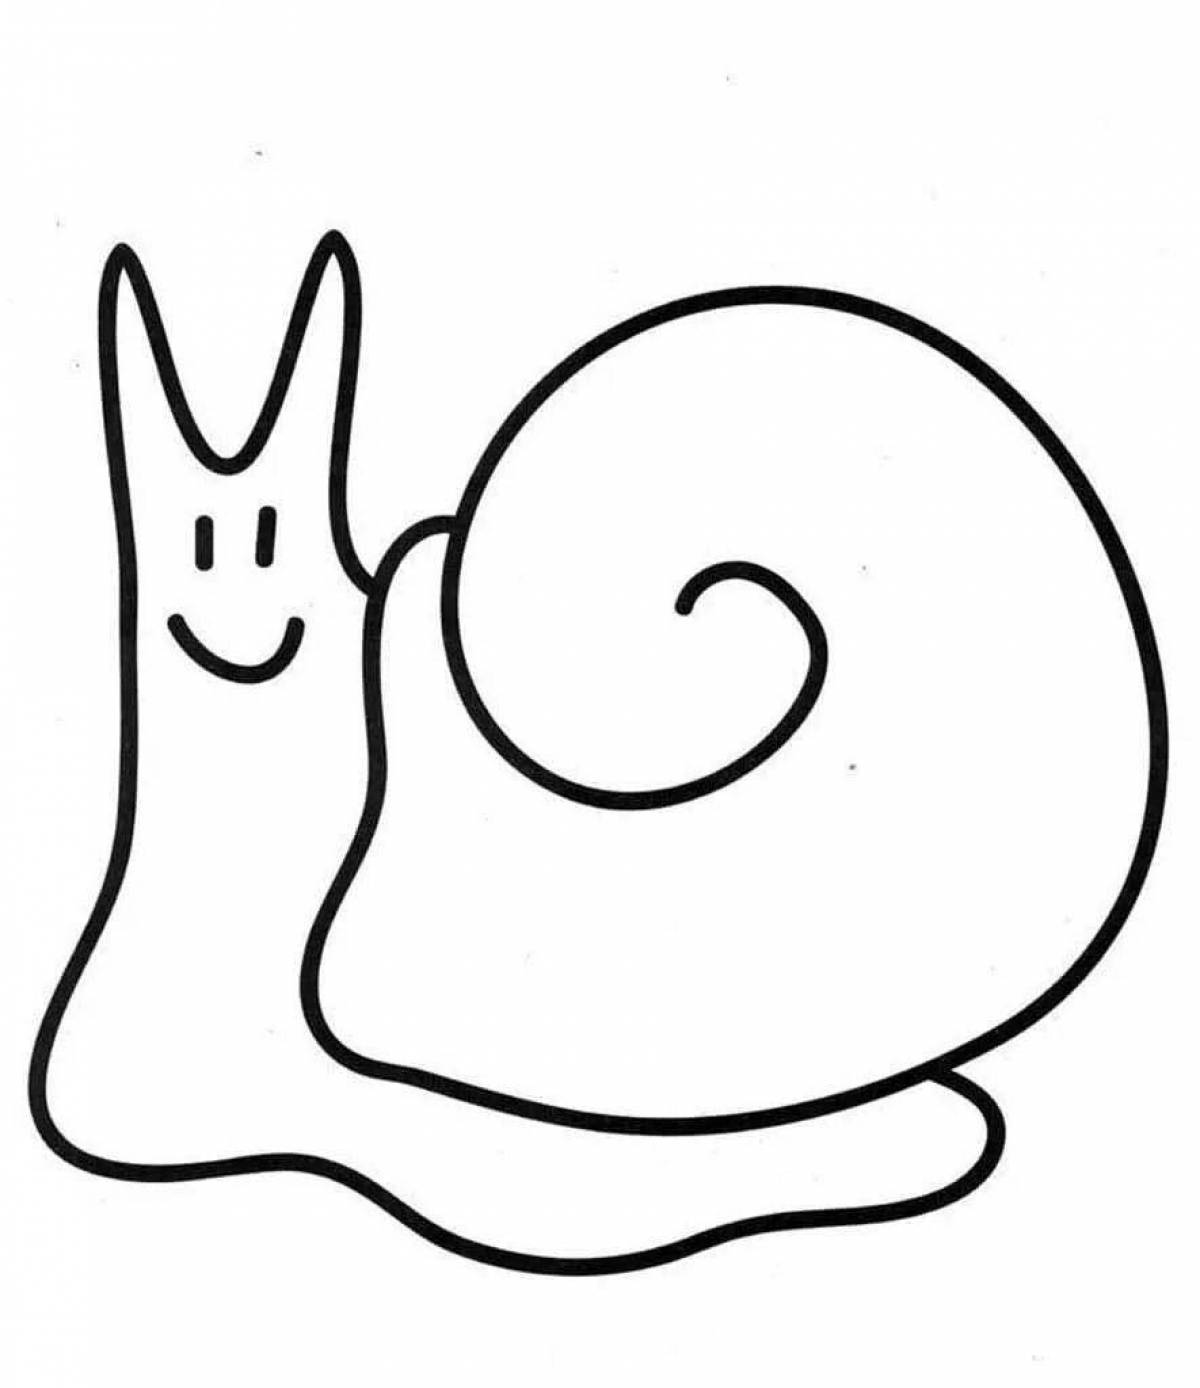 Bright color drawing of a snail for children